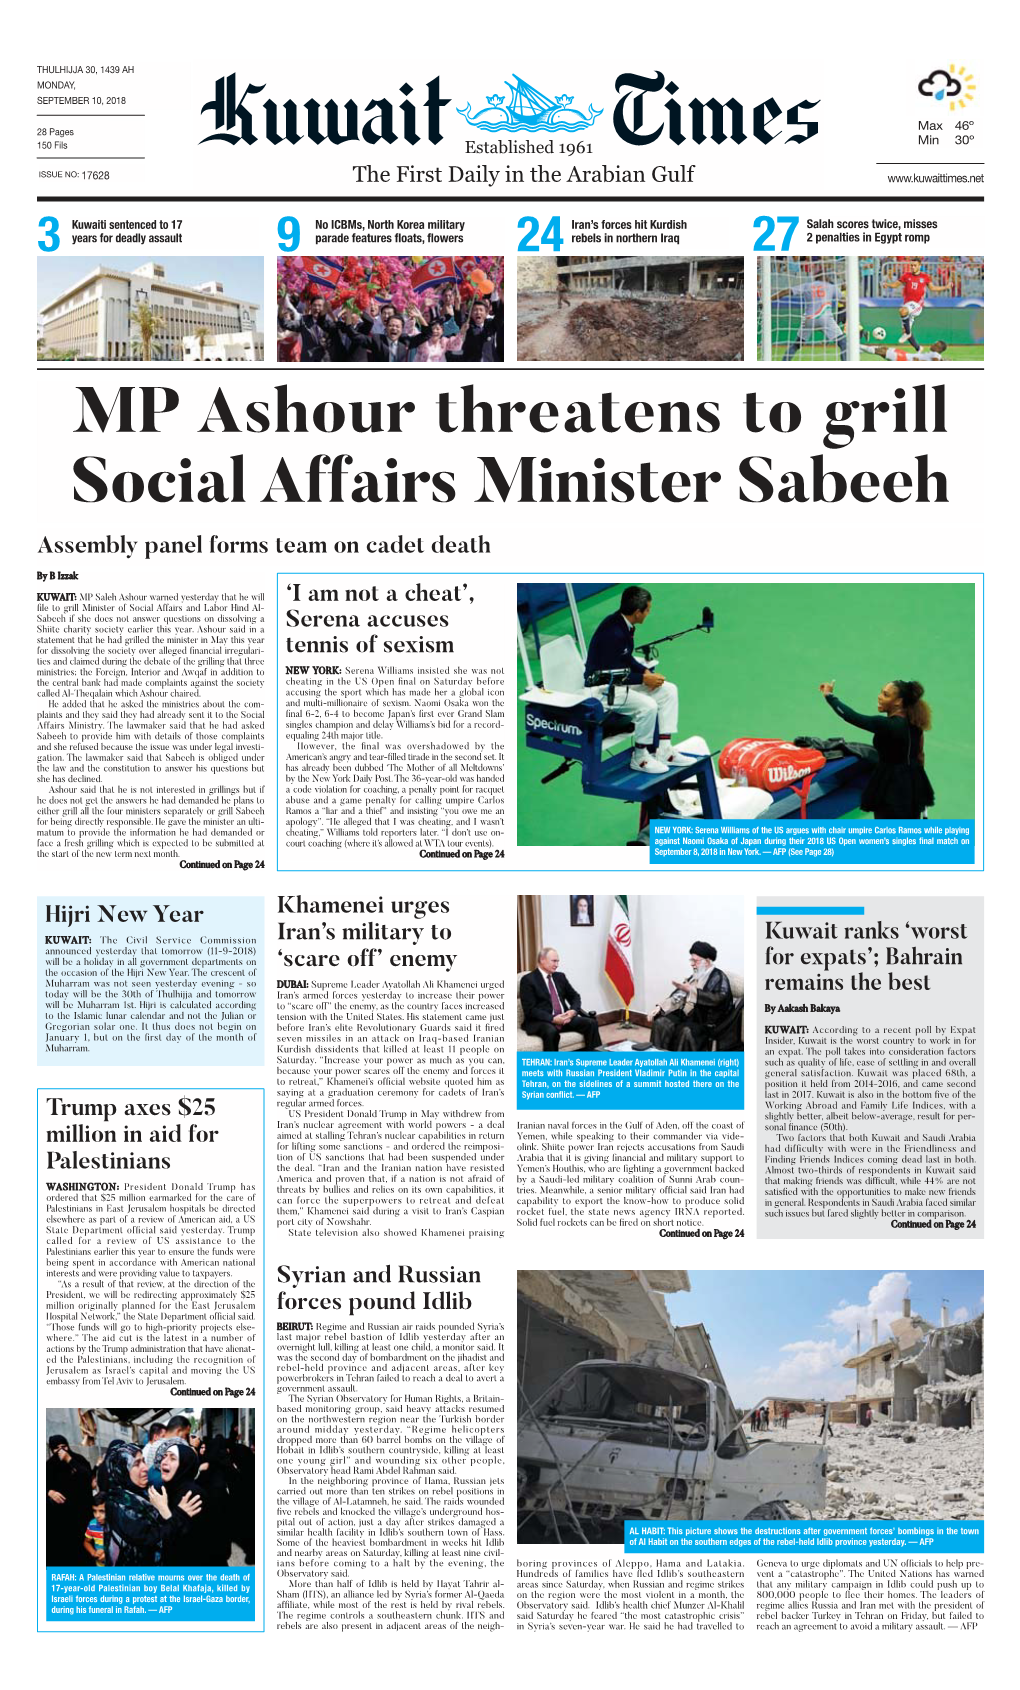 MP Ashour Threatens to Grill Social Affairs Minister Sabeeh Assembly Panel Forms Team on Cadet Death